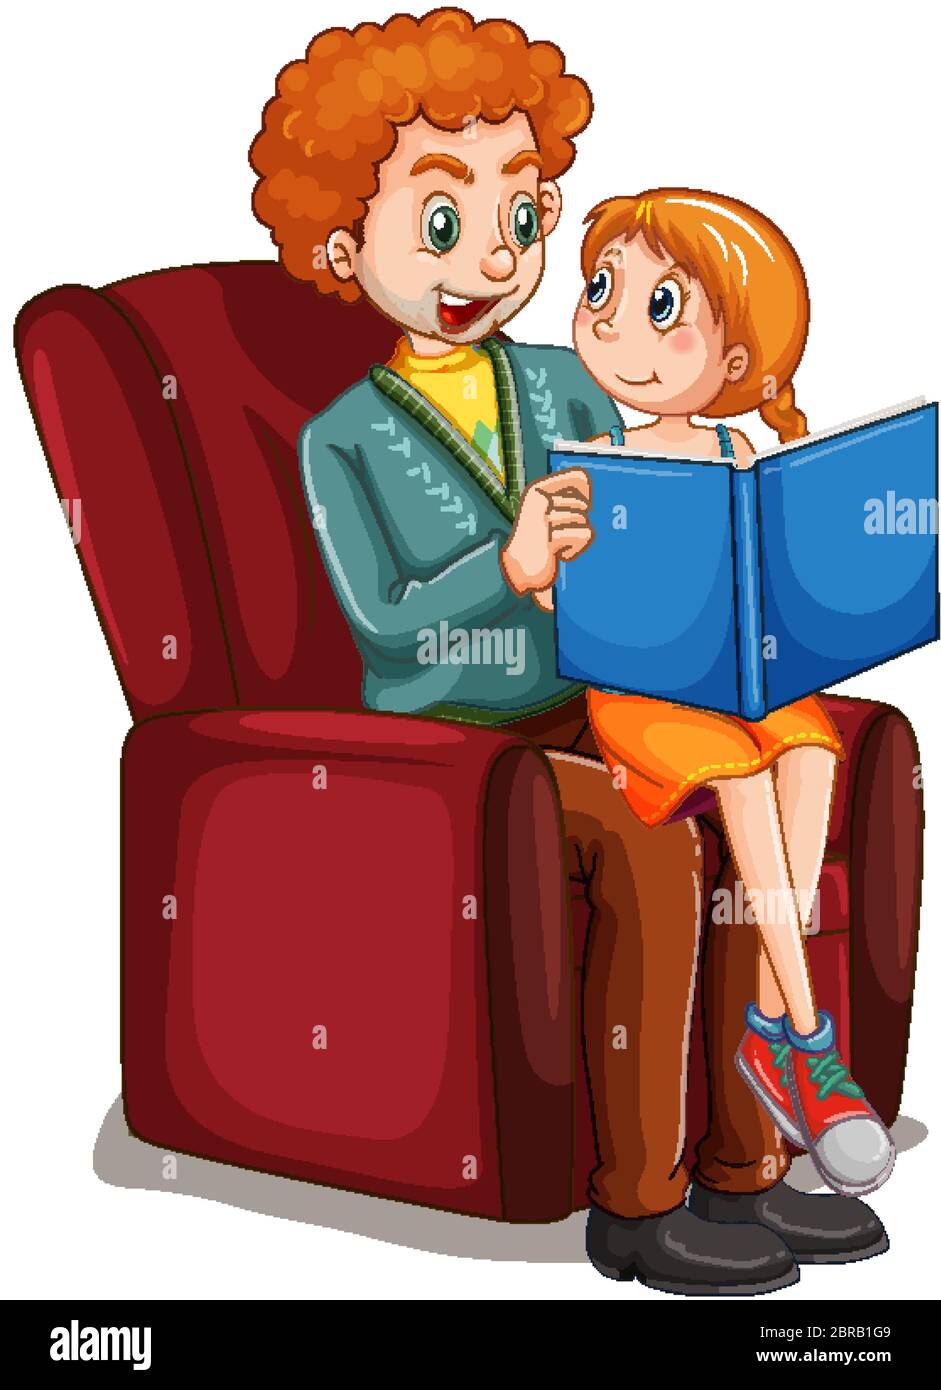 Father reding story to daughter on the sofa illustration Stock Vector